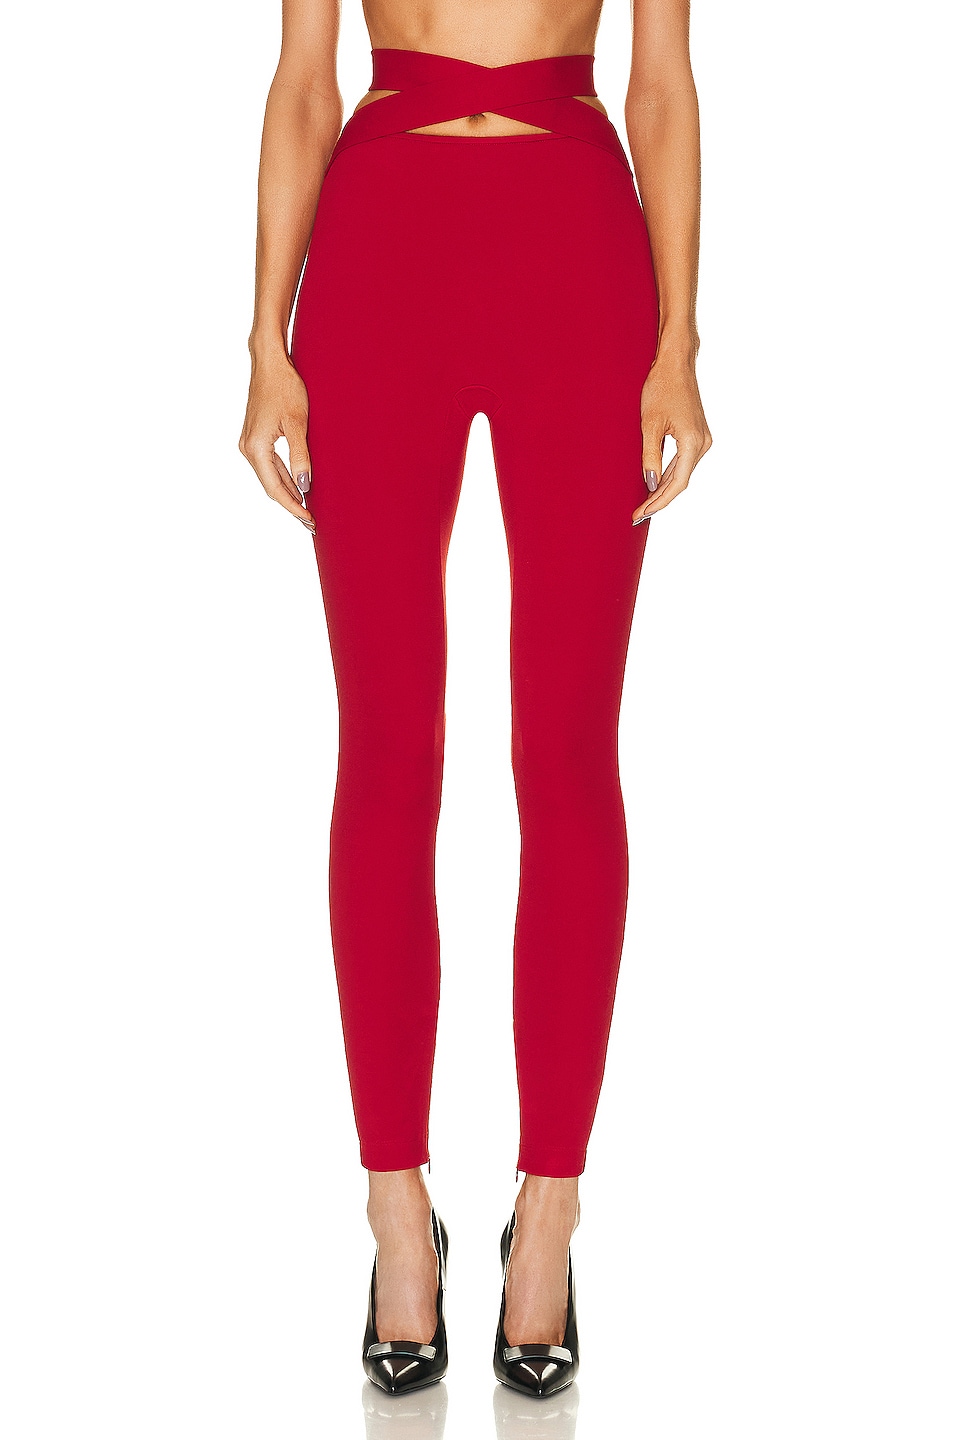 Image 1 of Dolce & Gabbana Criss Cross Legging in Bright Red